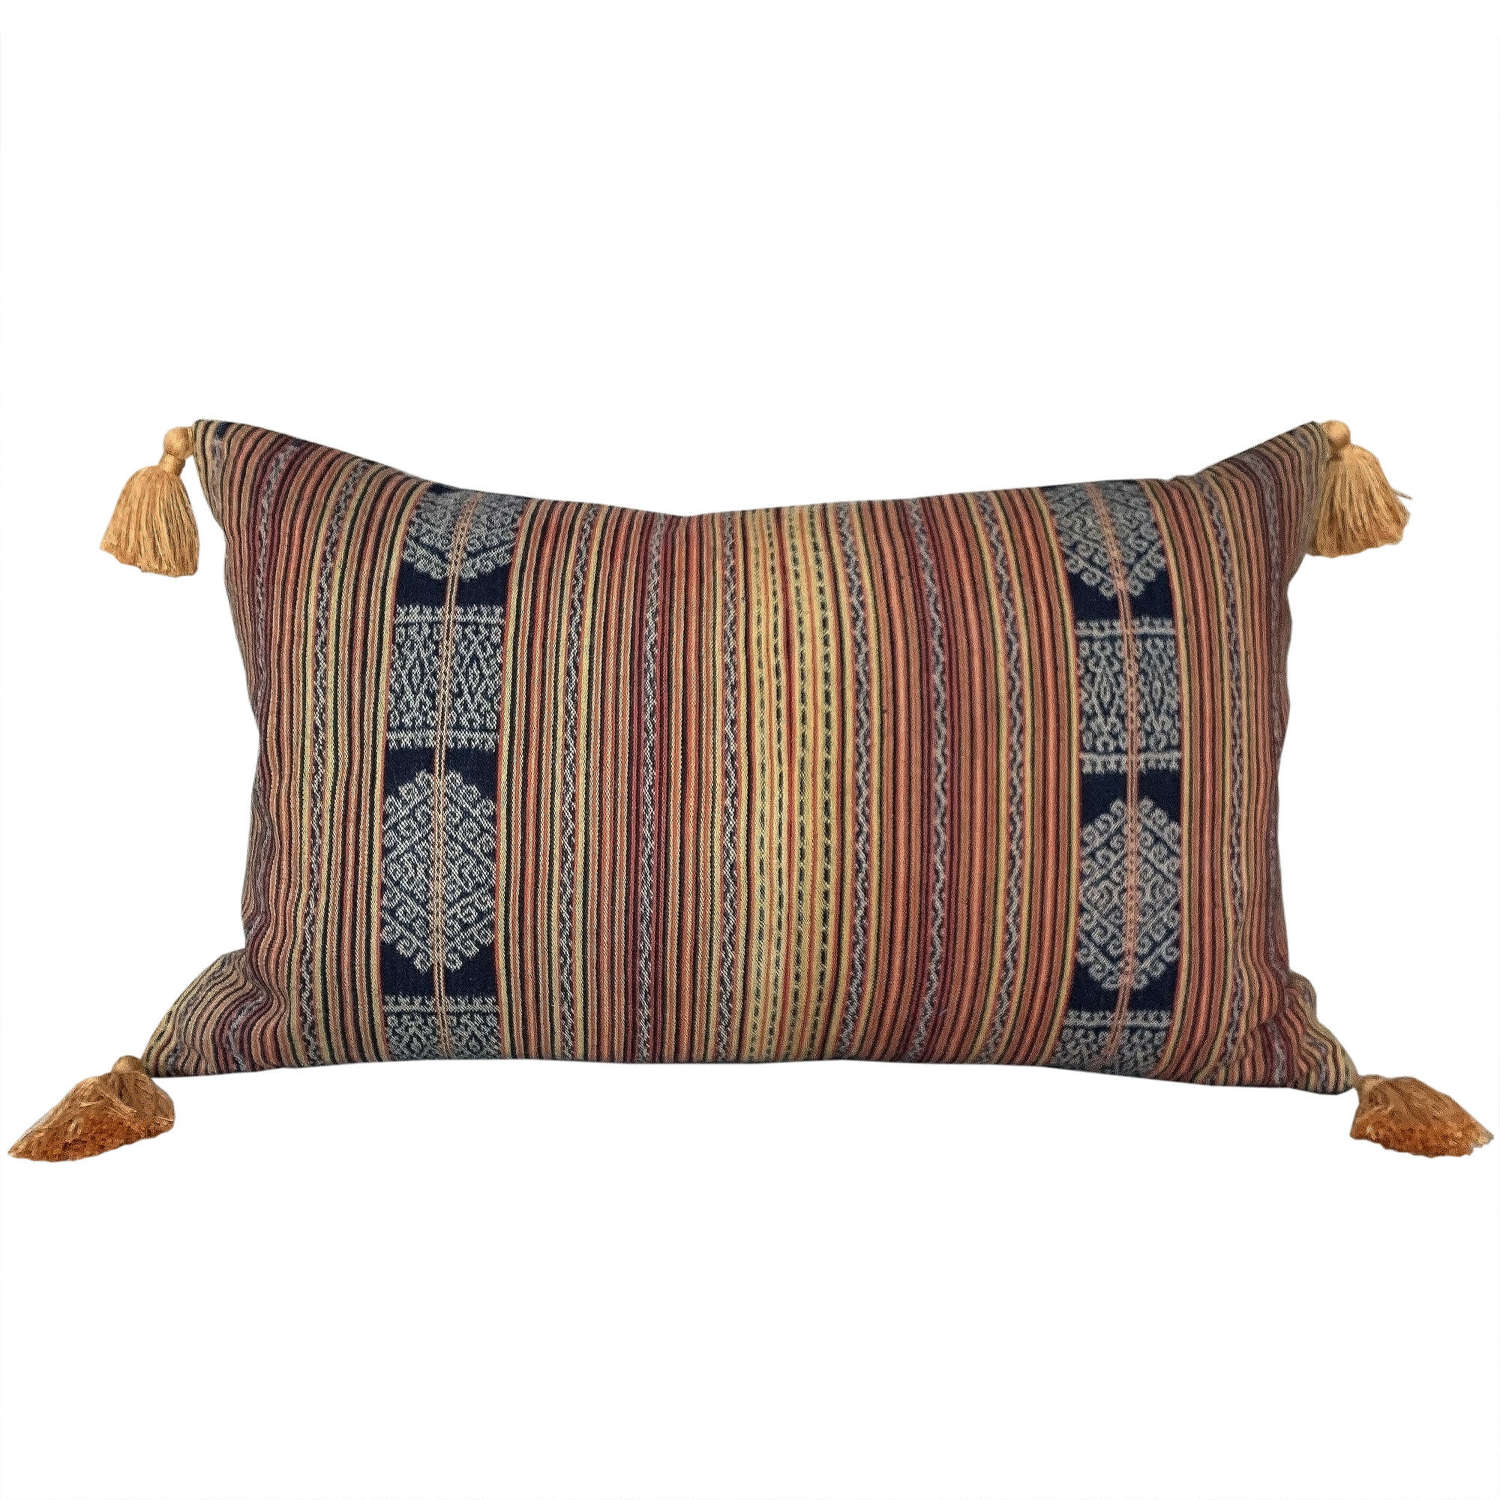 Timor cushion with tassels